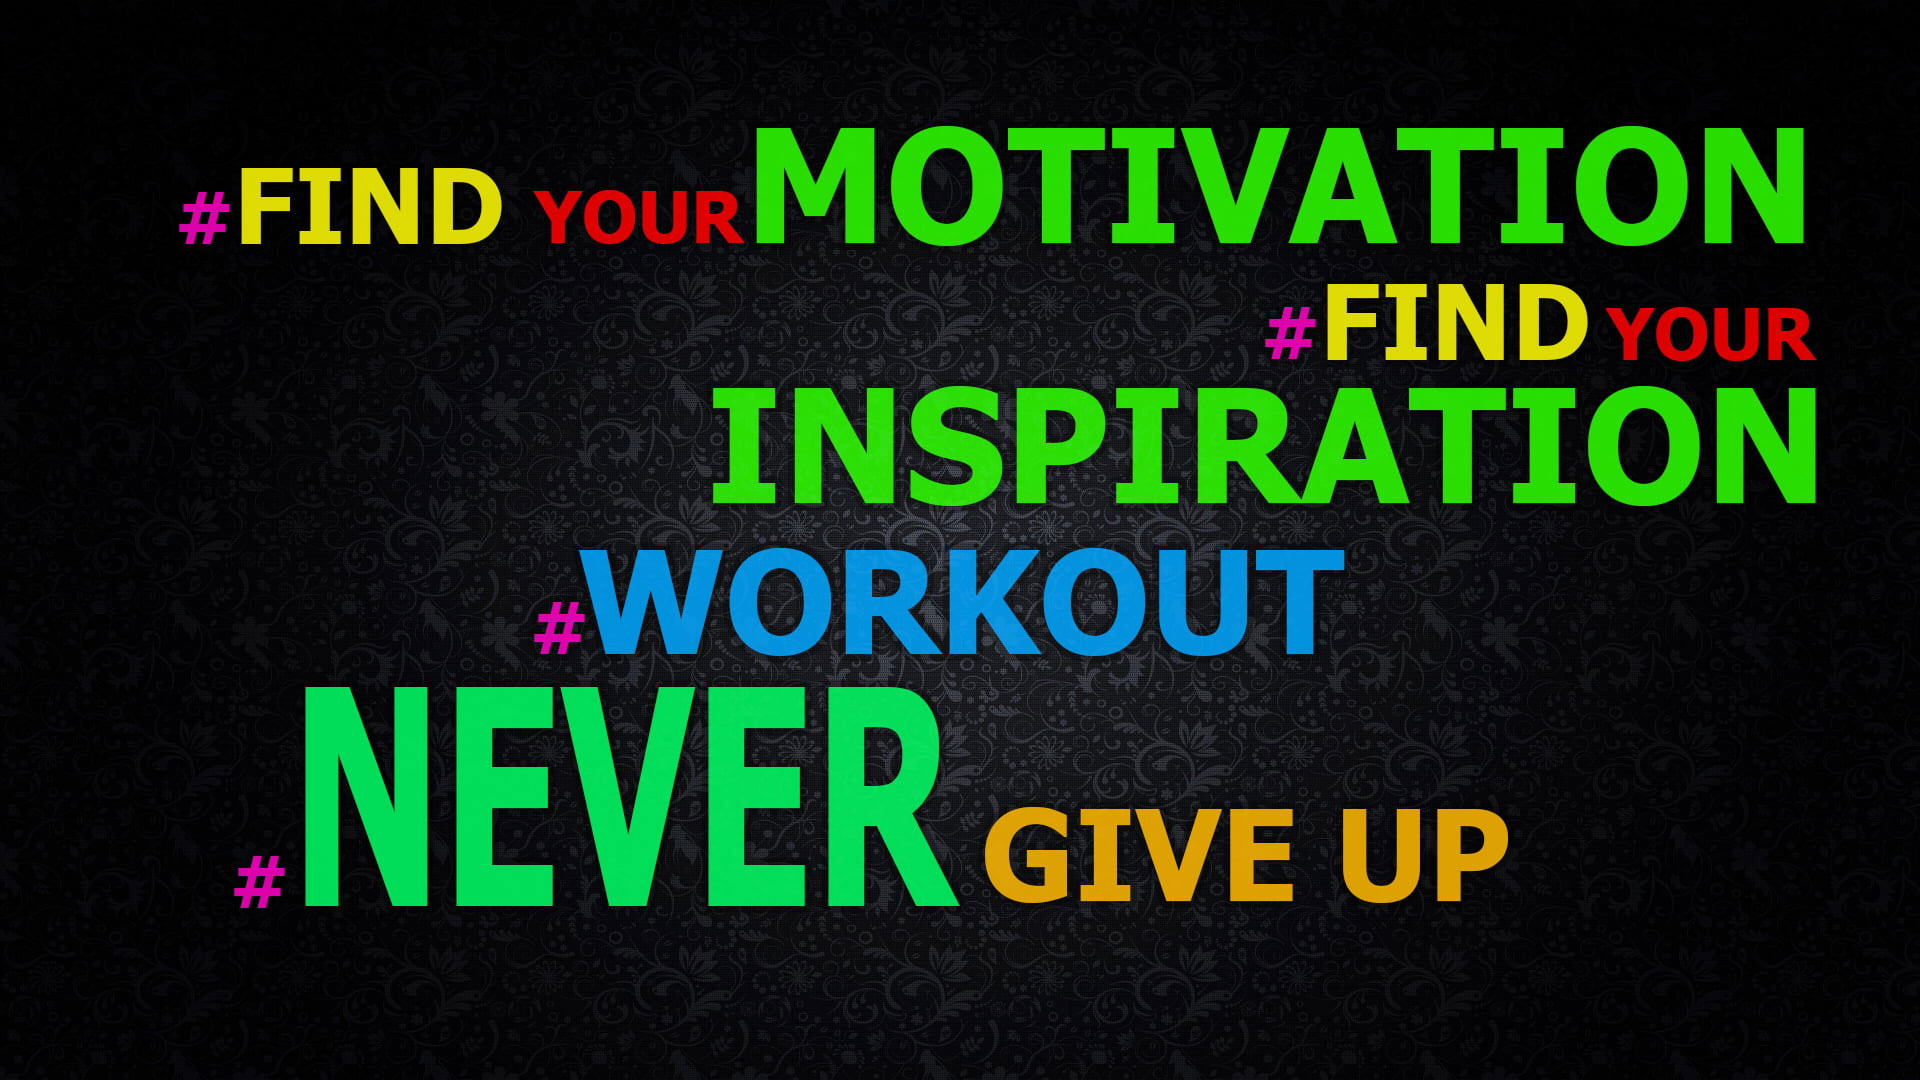 Find you motivation quote art wallpaper, motivational, exercising, Never Give Up!